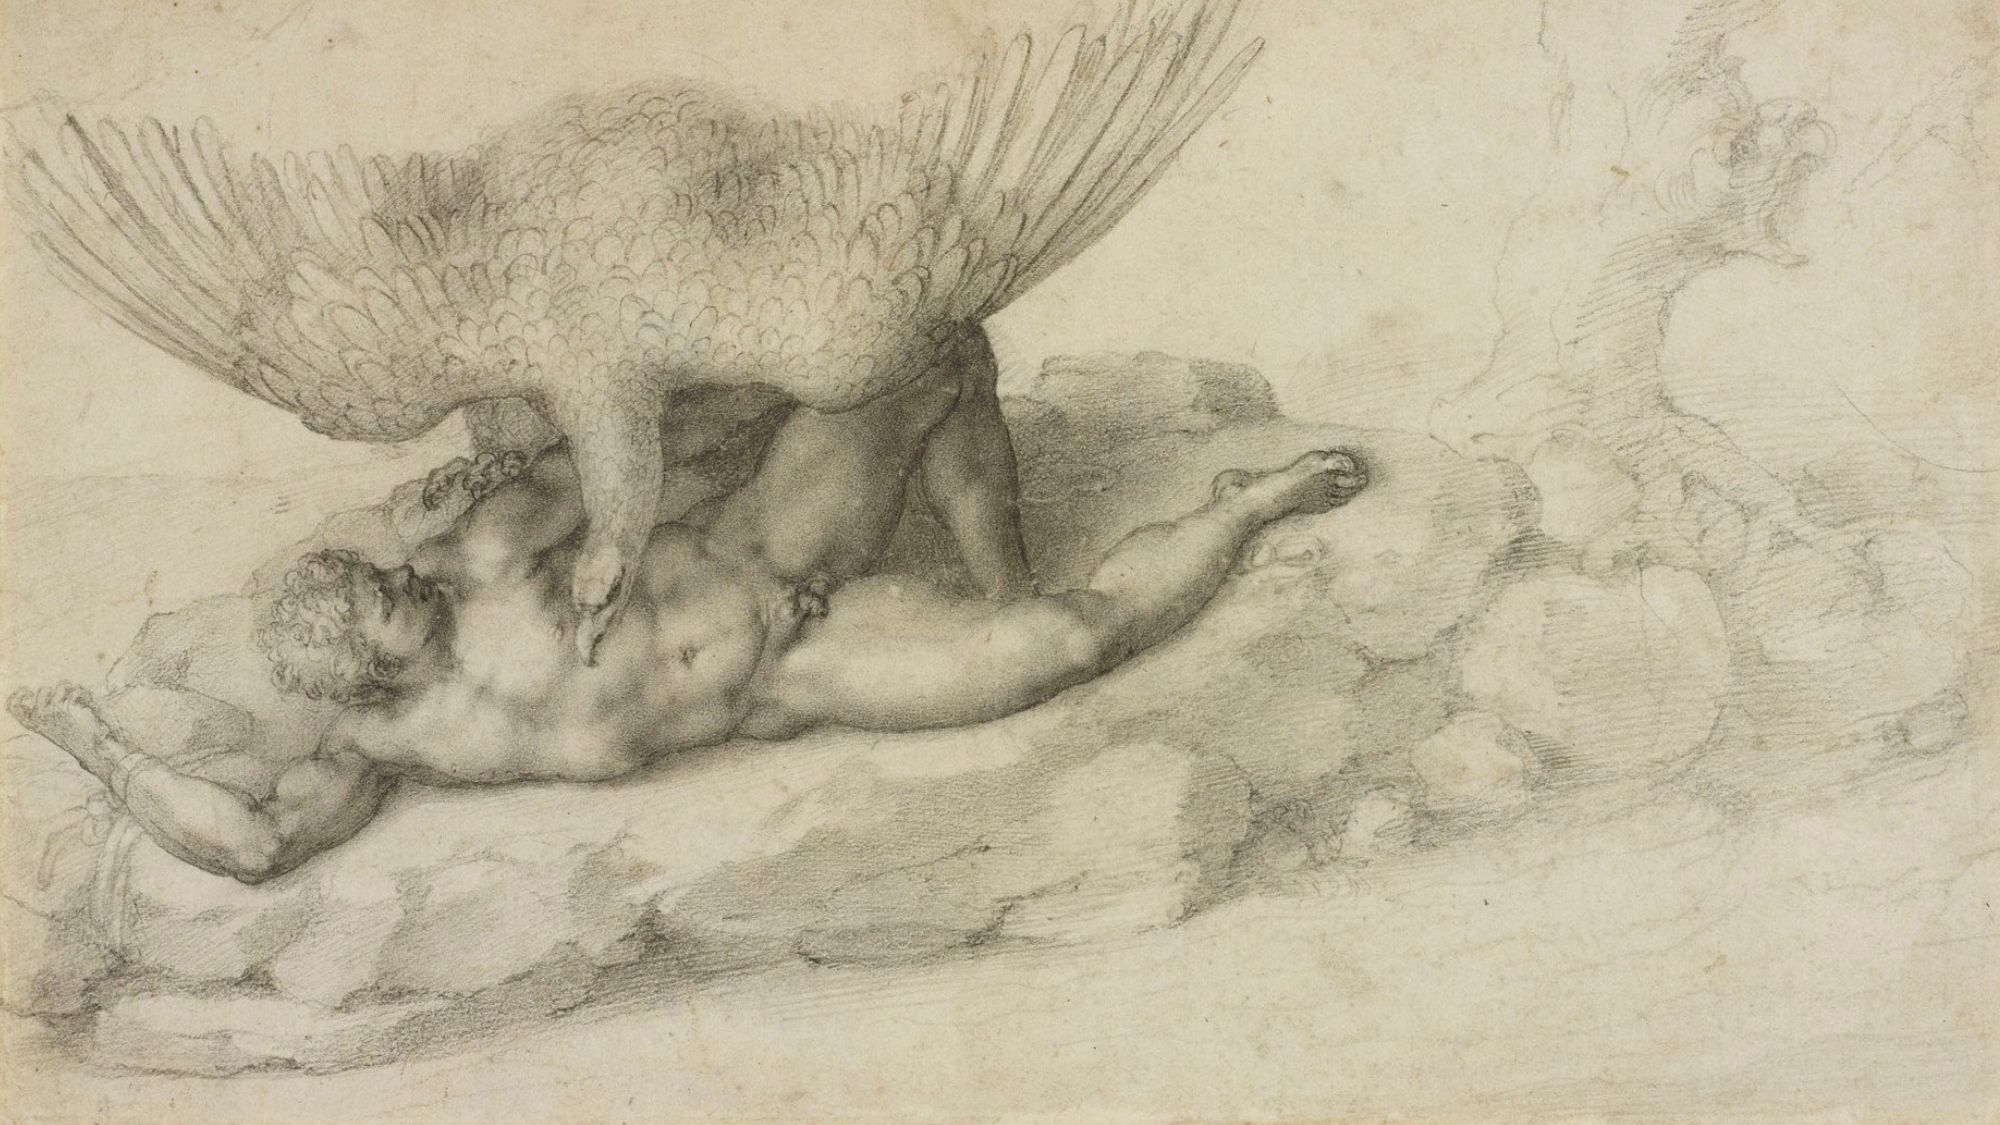  Michelangelo – the last decades review: an 'absorbing' exploration of art 